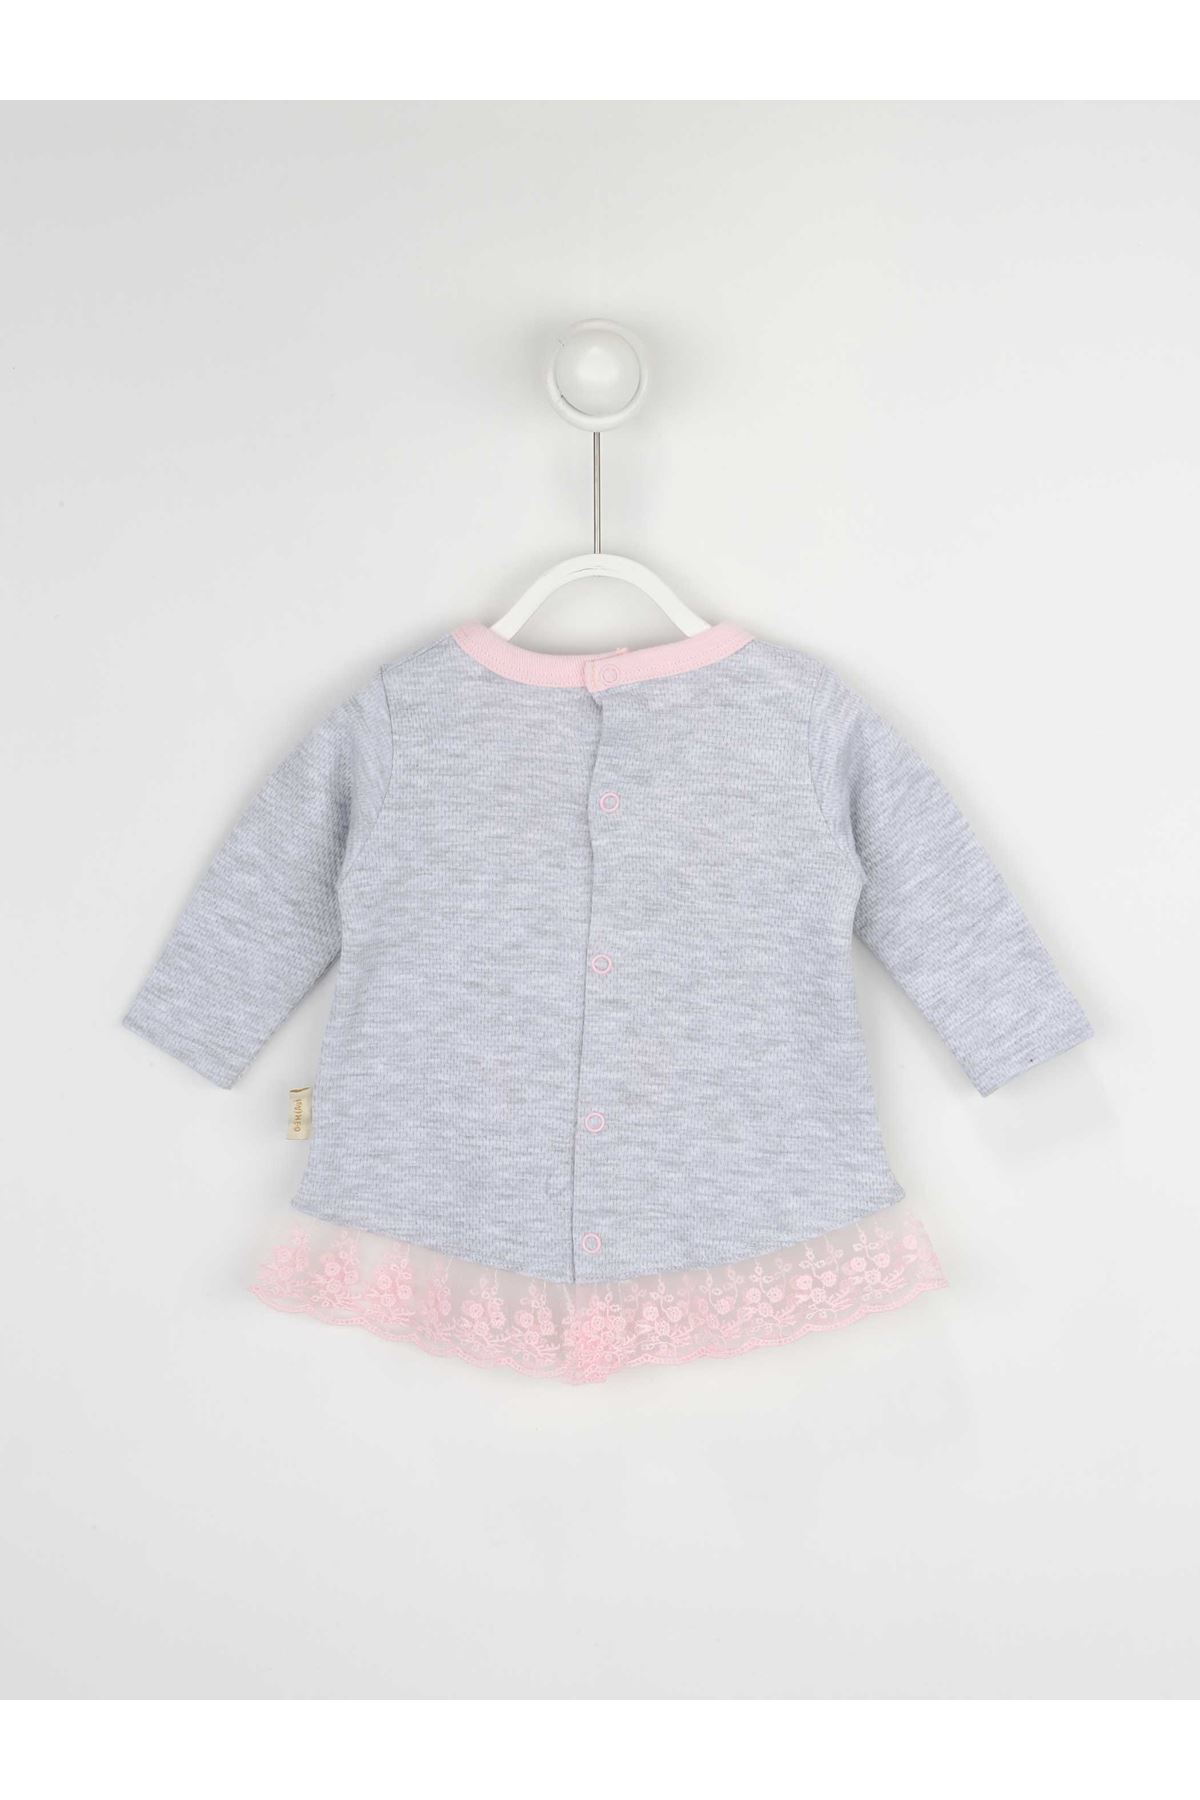 Grey Pink Baby Girl Daily 3 Piece Suit Set Cotton Daily Seasonal Casual Wear Girls Babies Suit Outfit Models